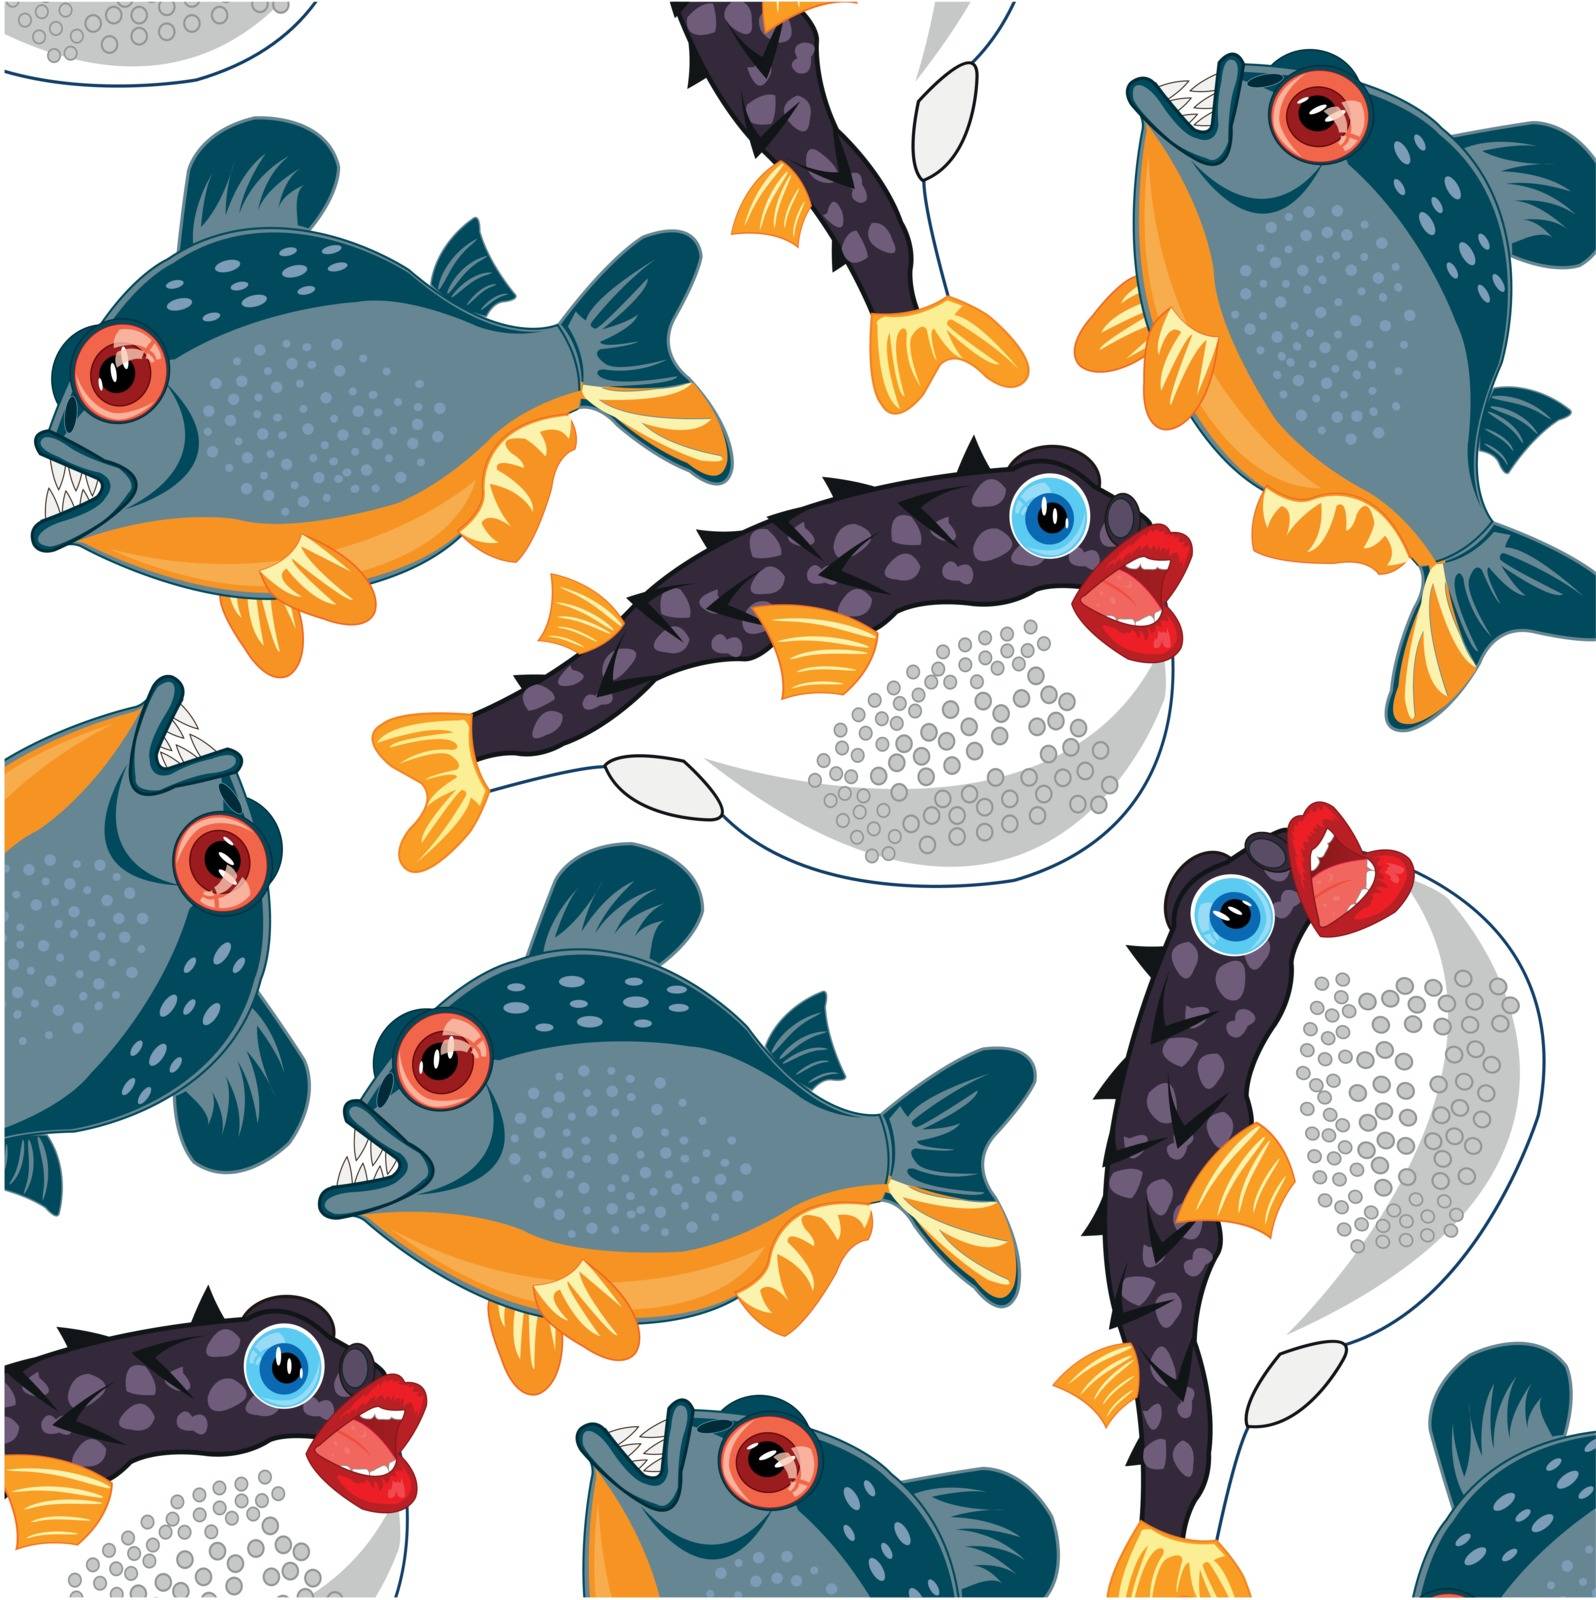 Dangerous and poisonous river and sea fish pattern by cobol1964